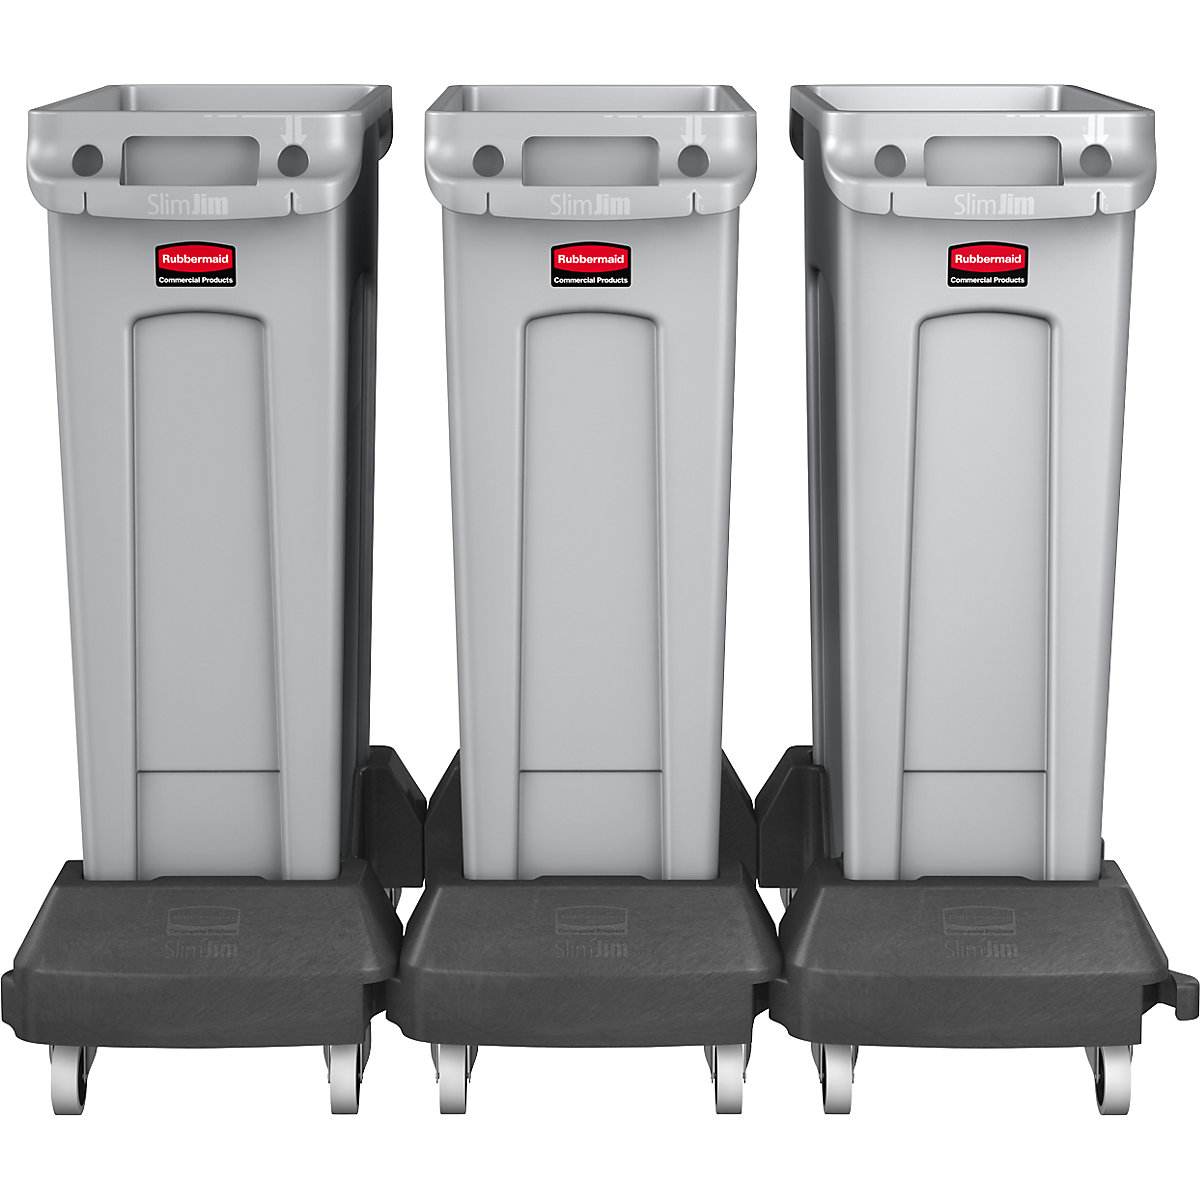 SLIM JIM® recyclable waste collection station - Rubbermaid